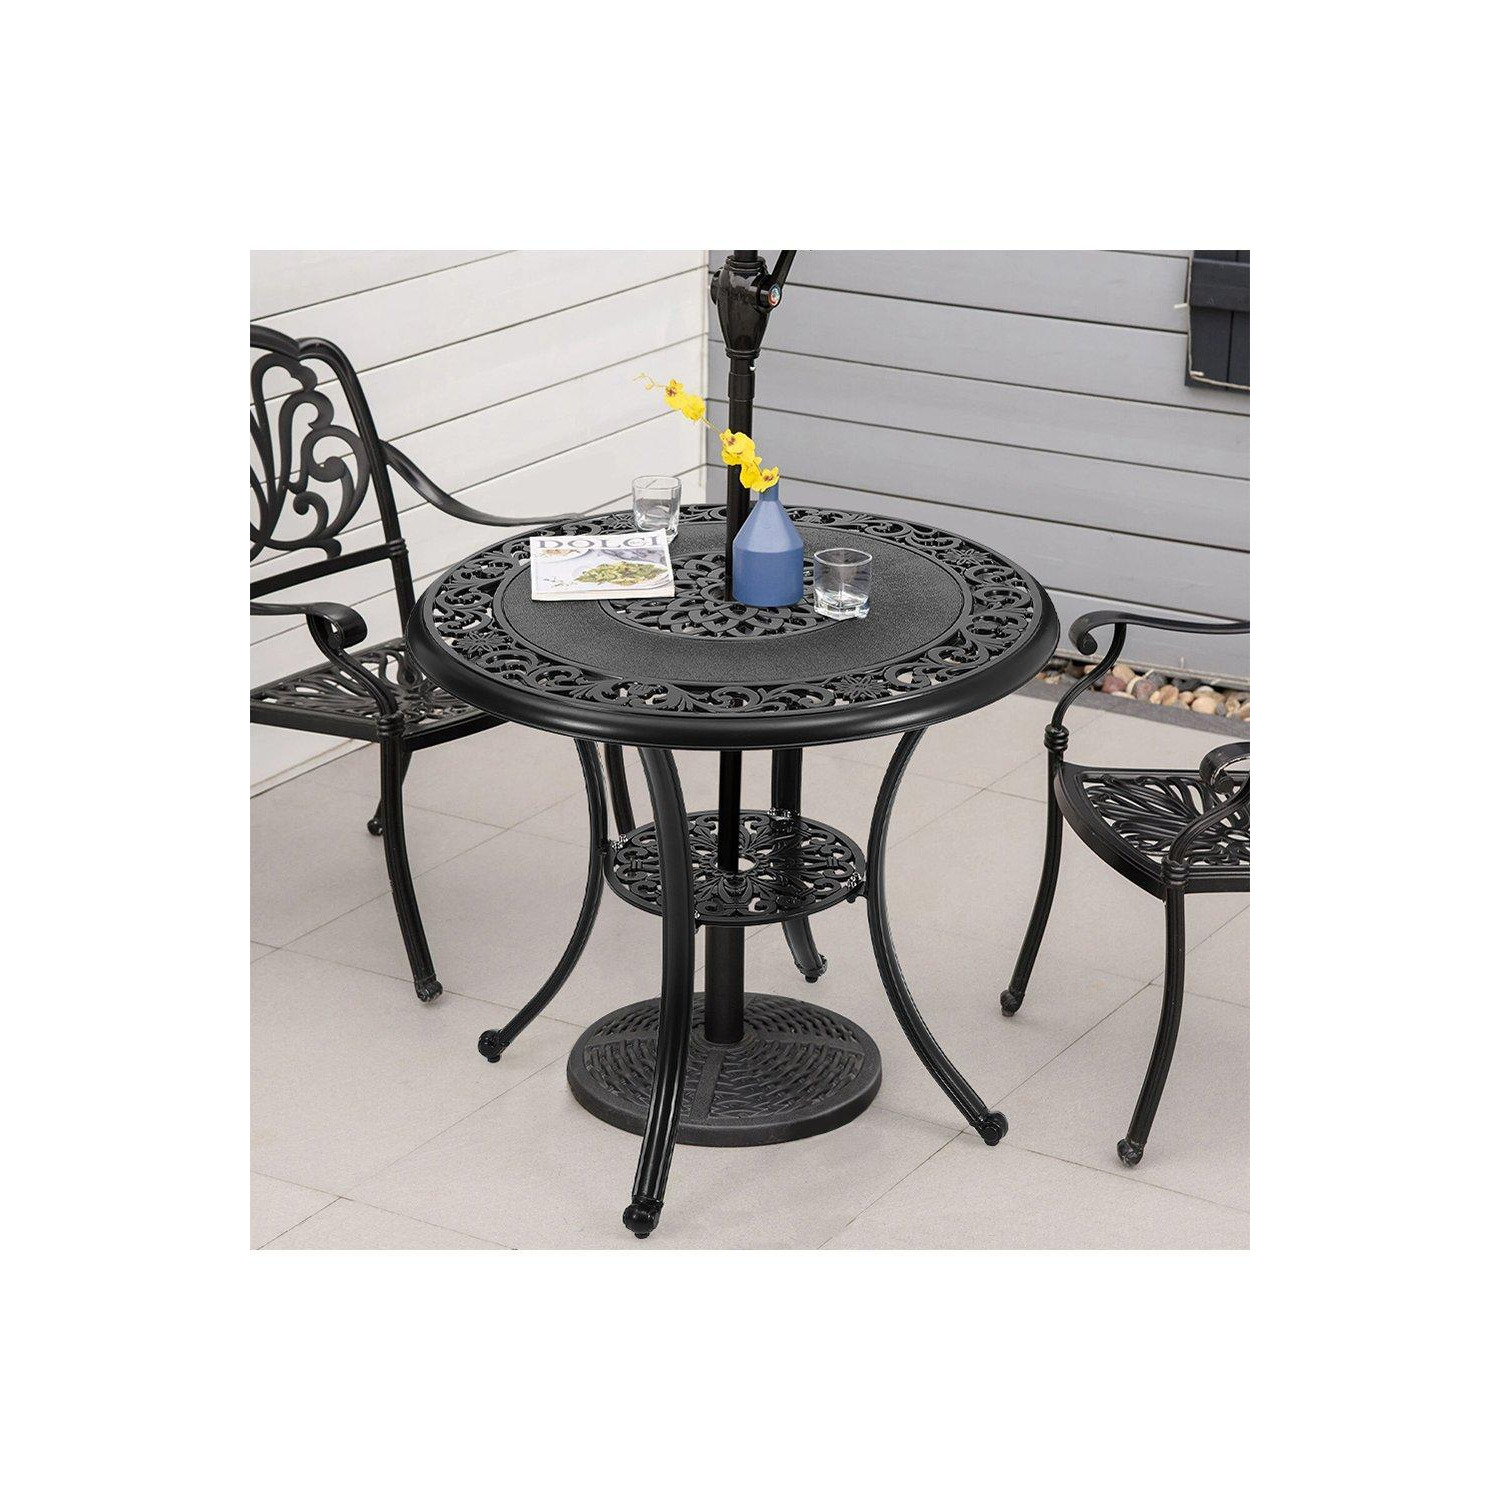 Flower Hollowed Out Cast Aluminum Patio Dining Table with Umbrella Hole - image 1